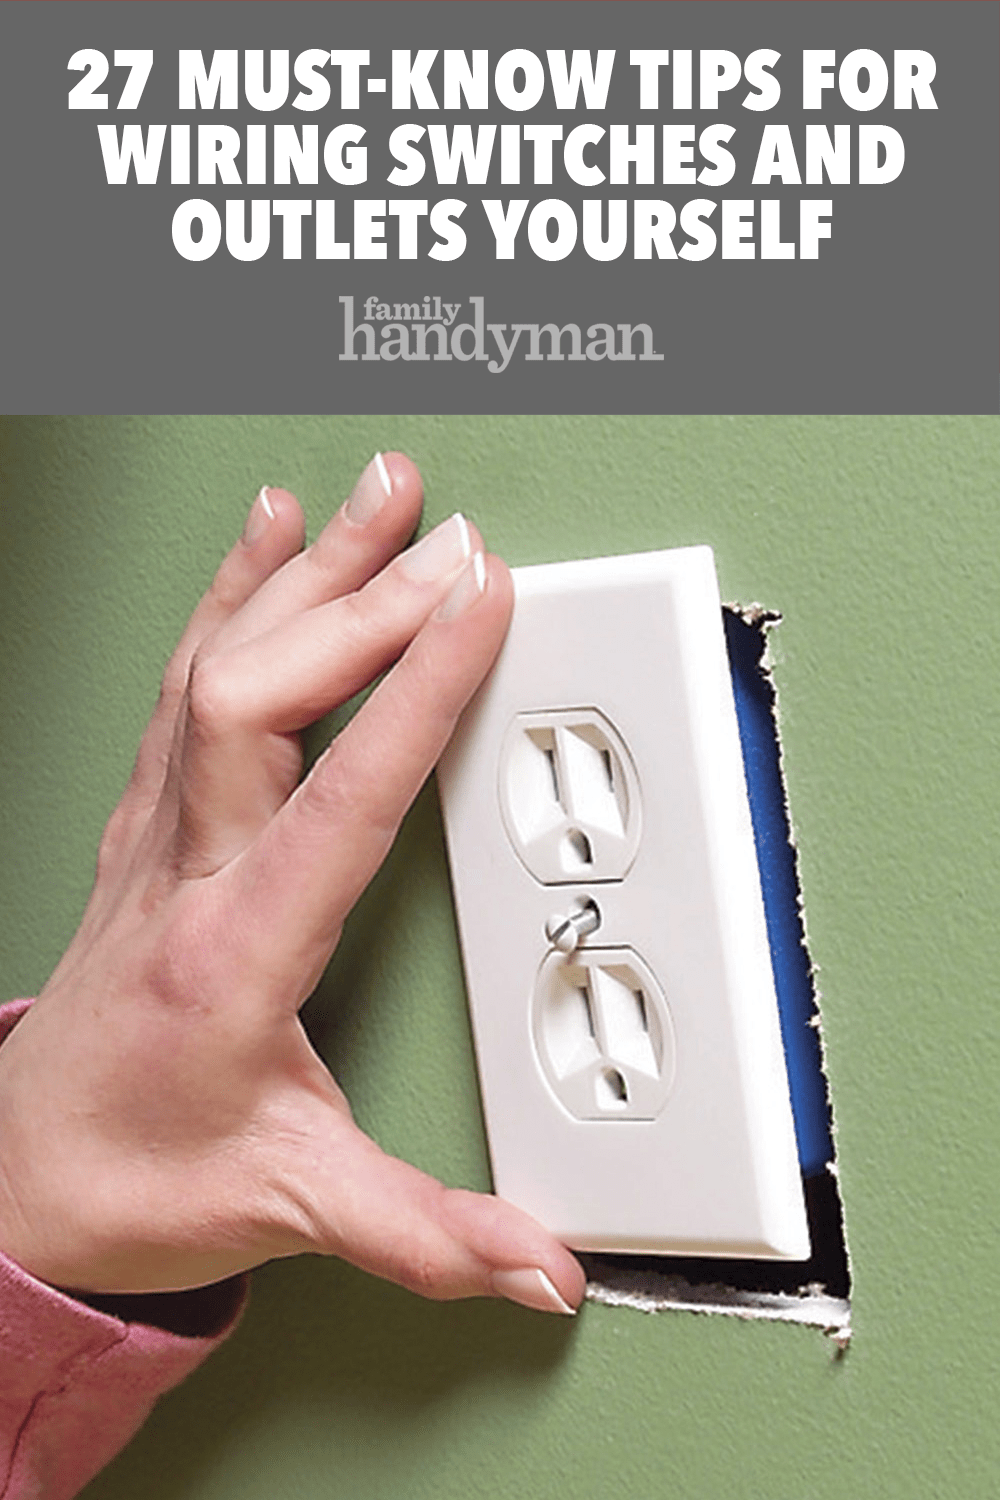 27 Must-Know Tips for Wiring Switches and Outlets Yourself